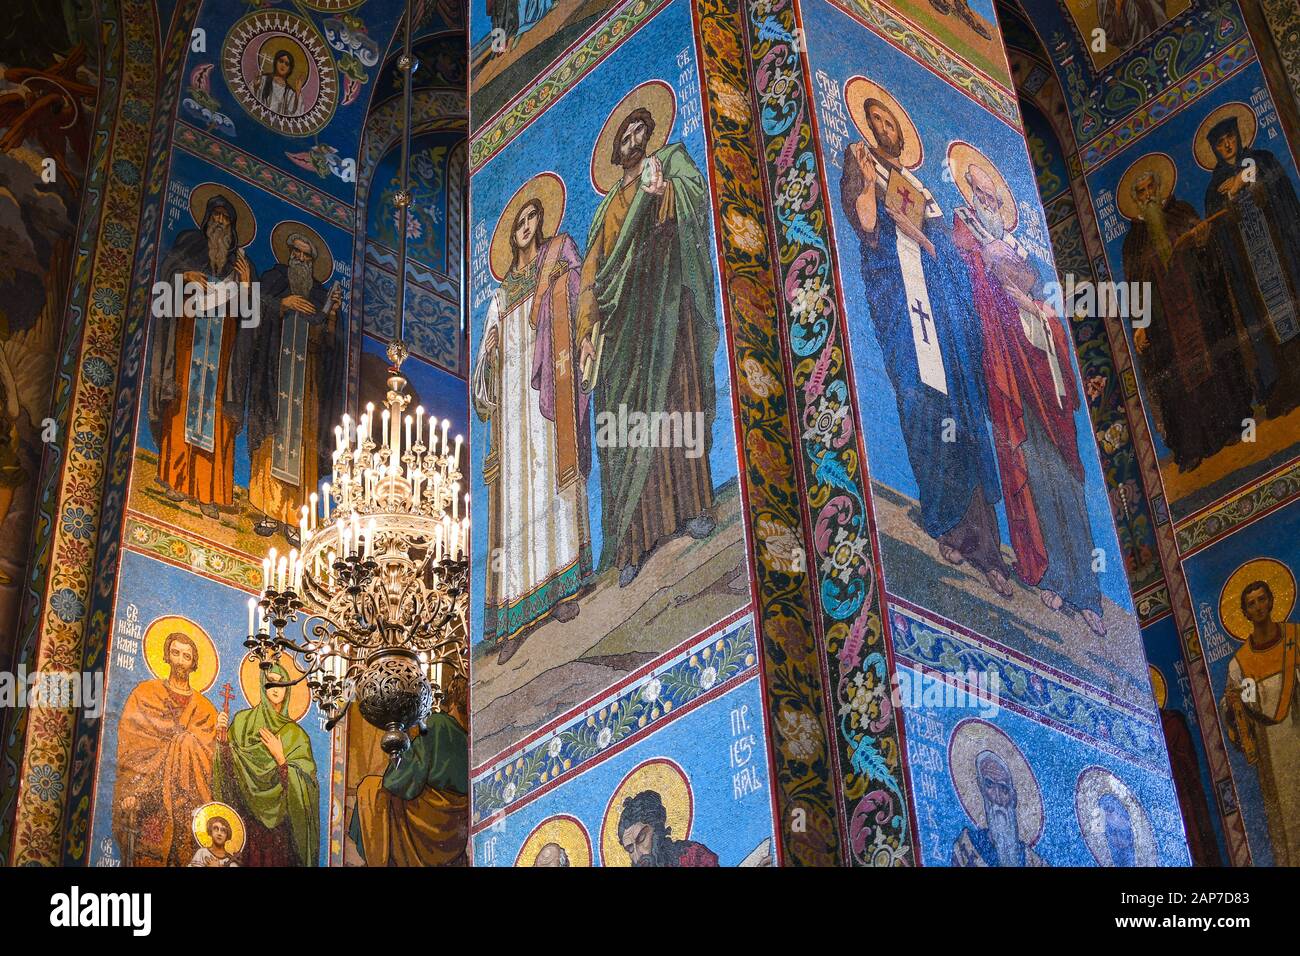 Inside the Church of the Savior on Spilled Blood in St Petersburg, Russia, depicting religious scenes in mosaics on the walls and ceilings Stock Photo